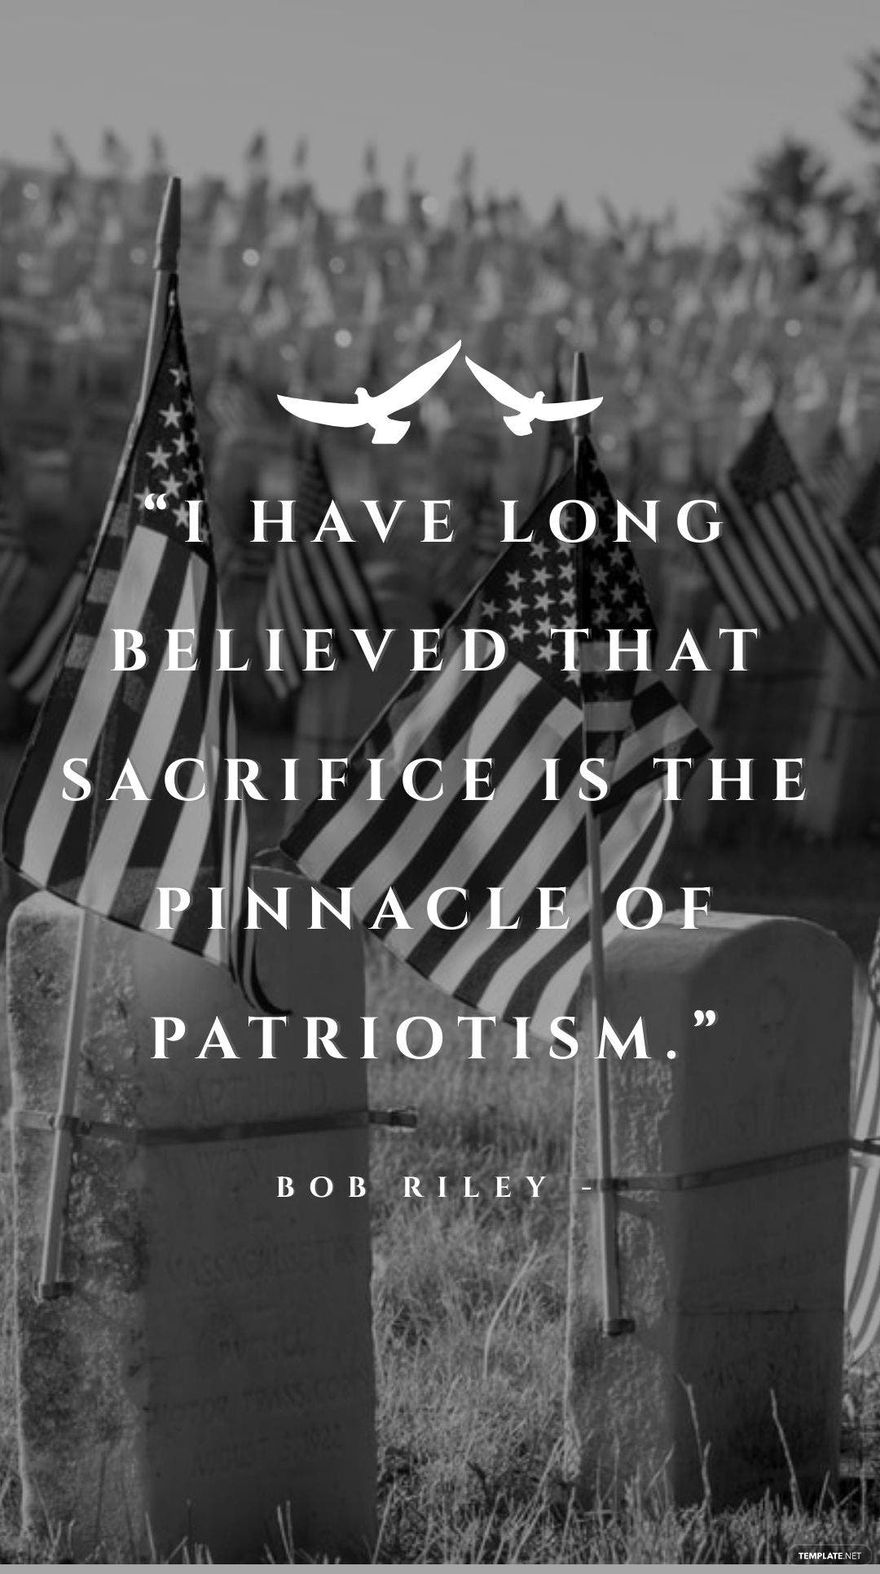 Bob Riley - “I have long believed that sacrifice is the pinnacle of patriotism.”